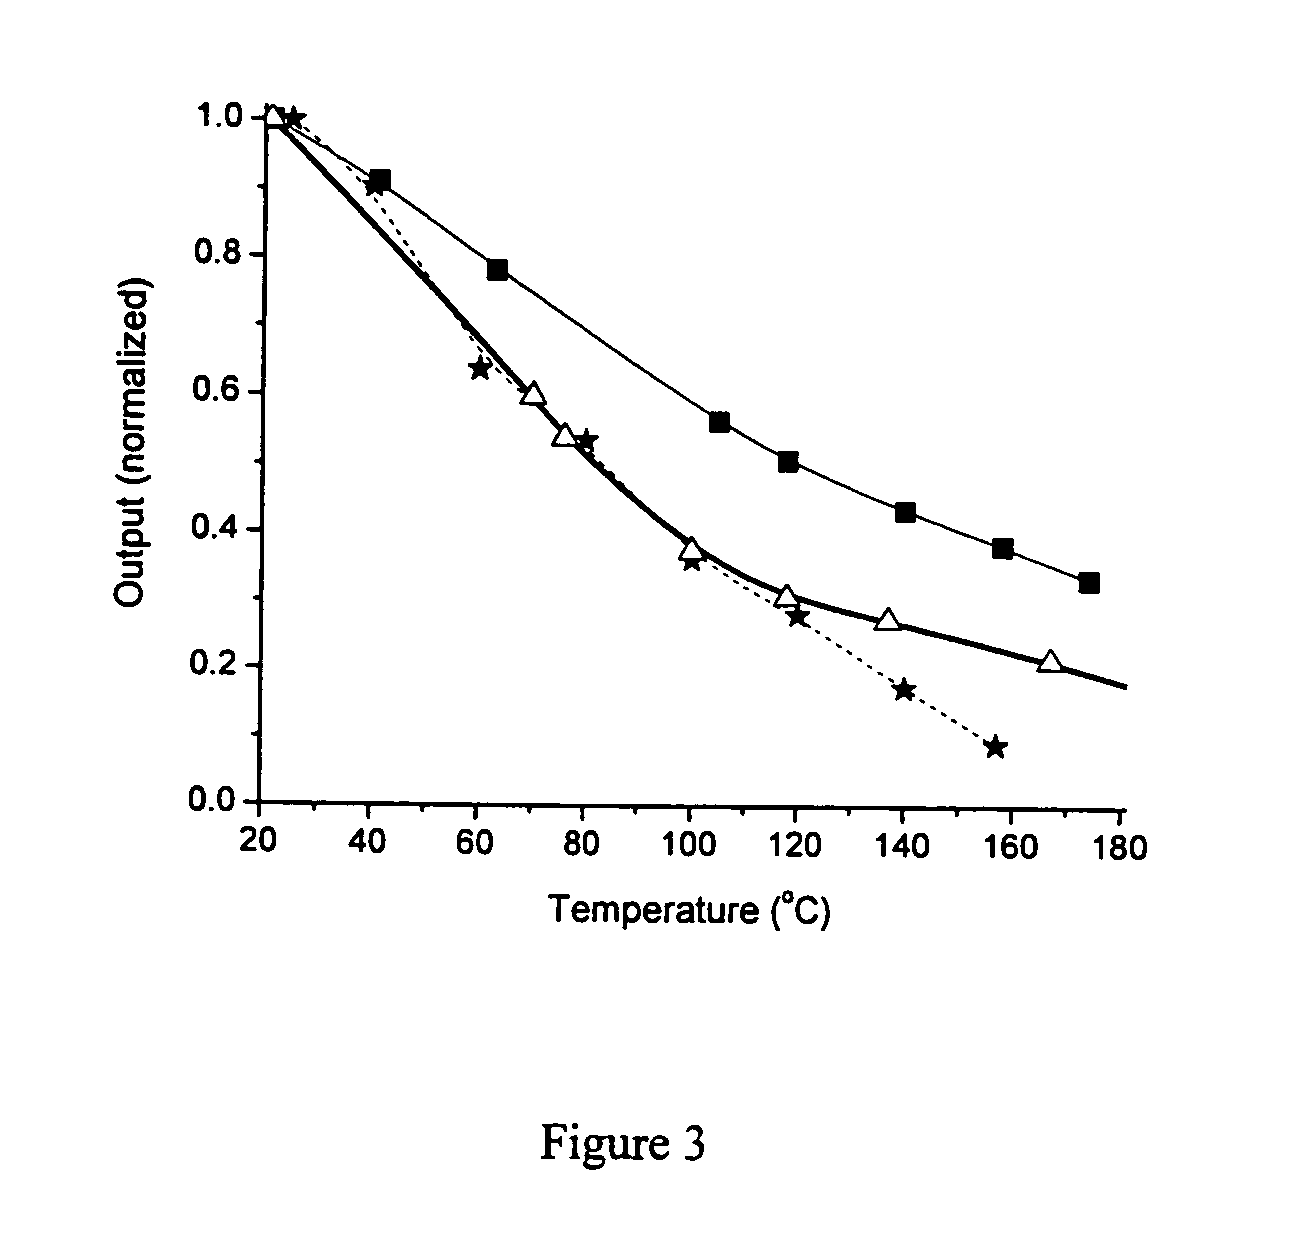 Substrate design for optimized performance of up-conversion phosphors utilizing proper thermal management